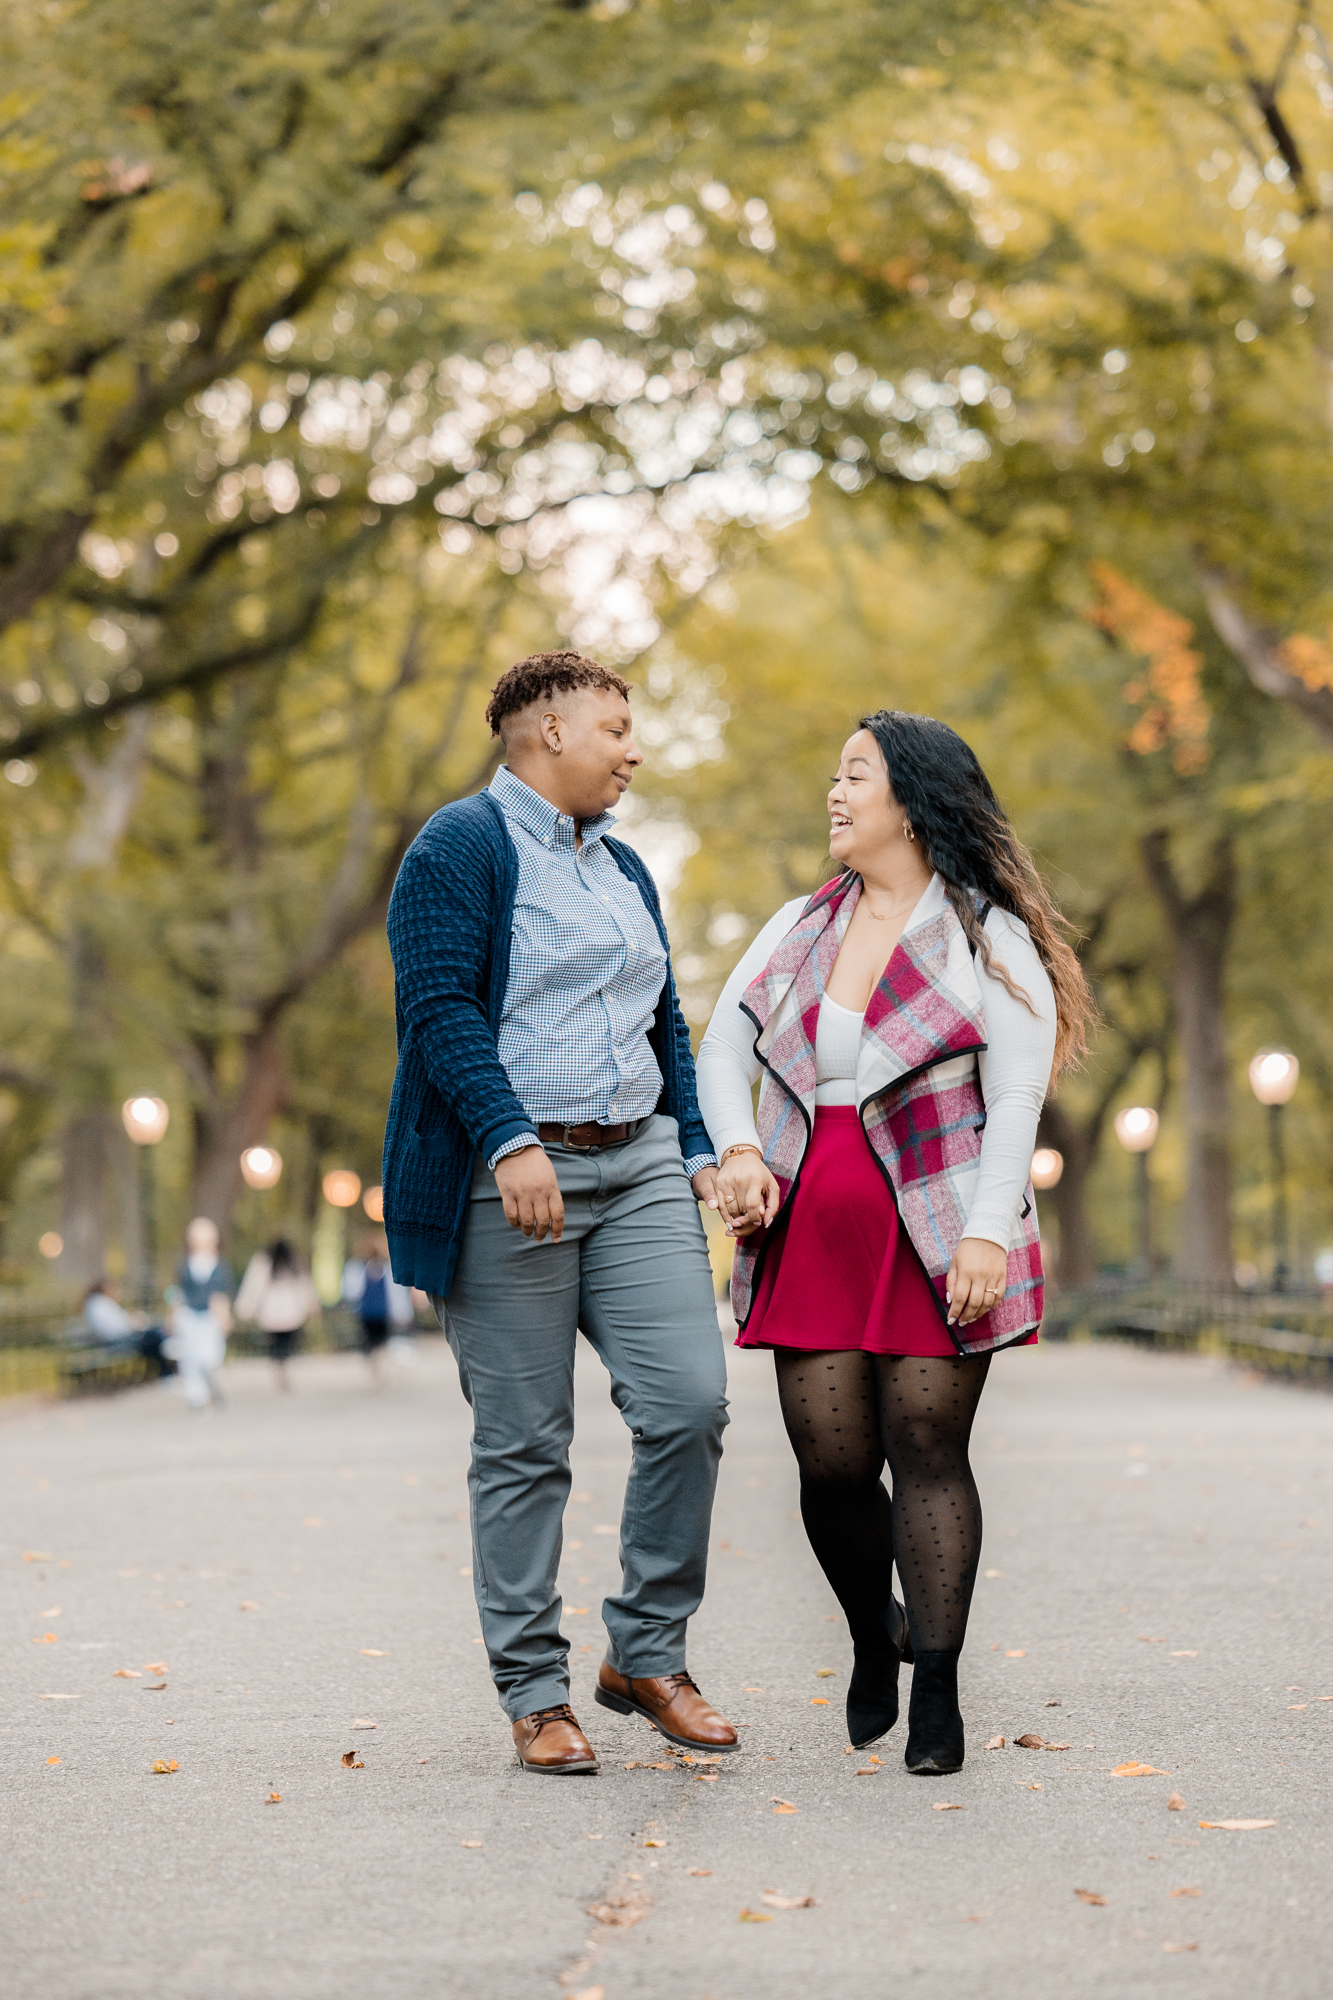 Playful Central Park Engagement Photos in Autumn at Sunrise